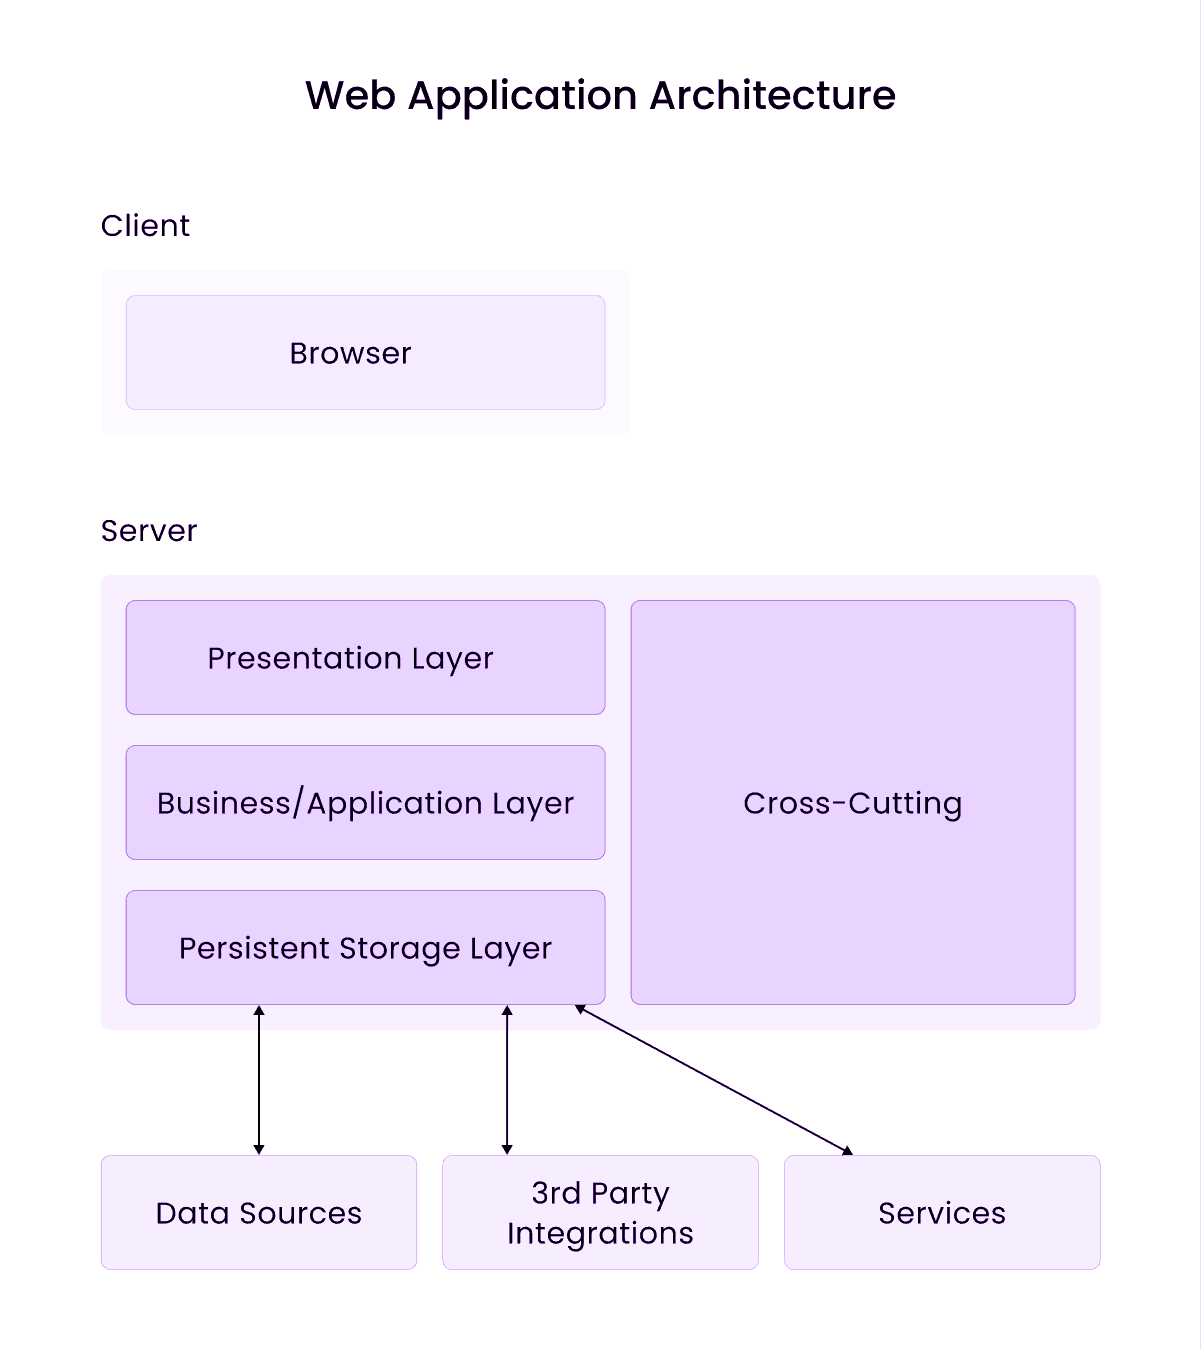 Layers of Web Application Architecture